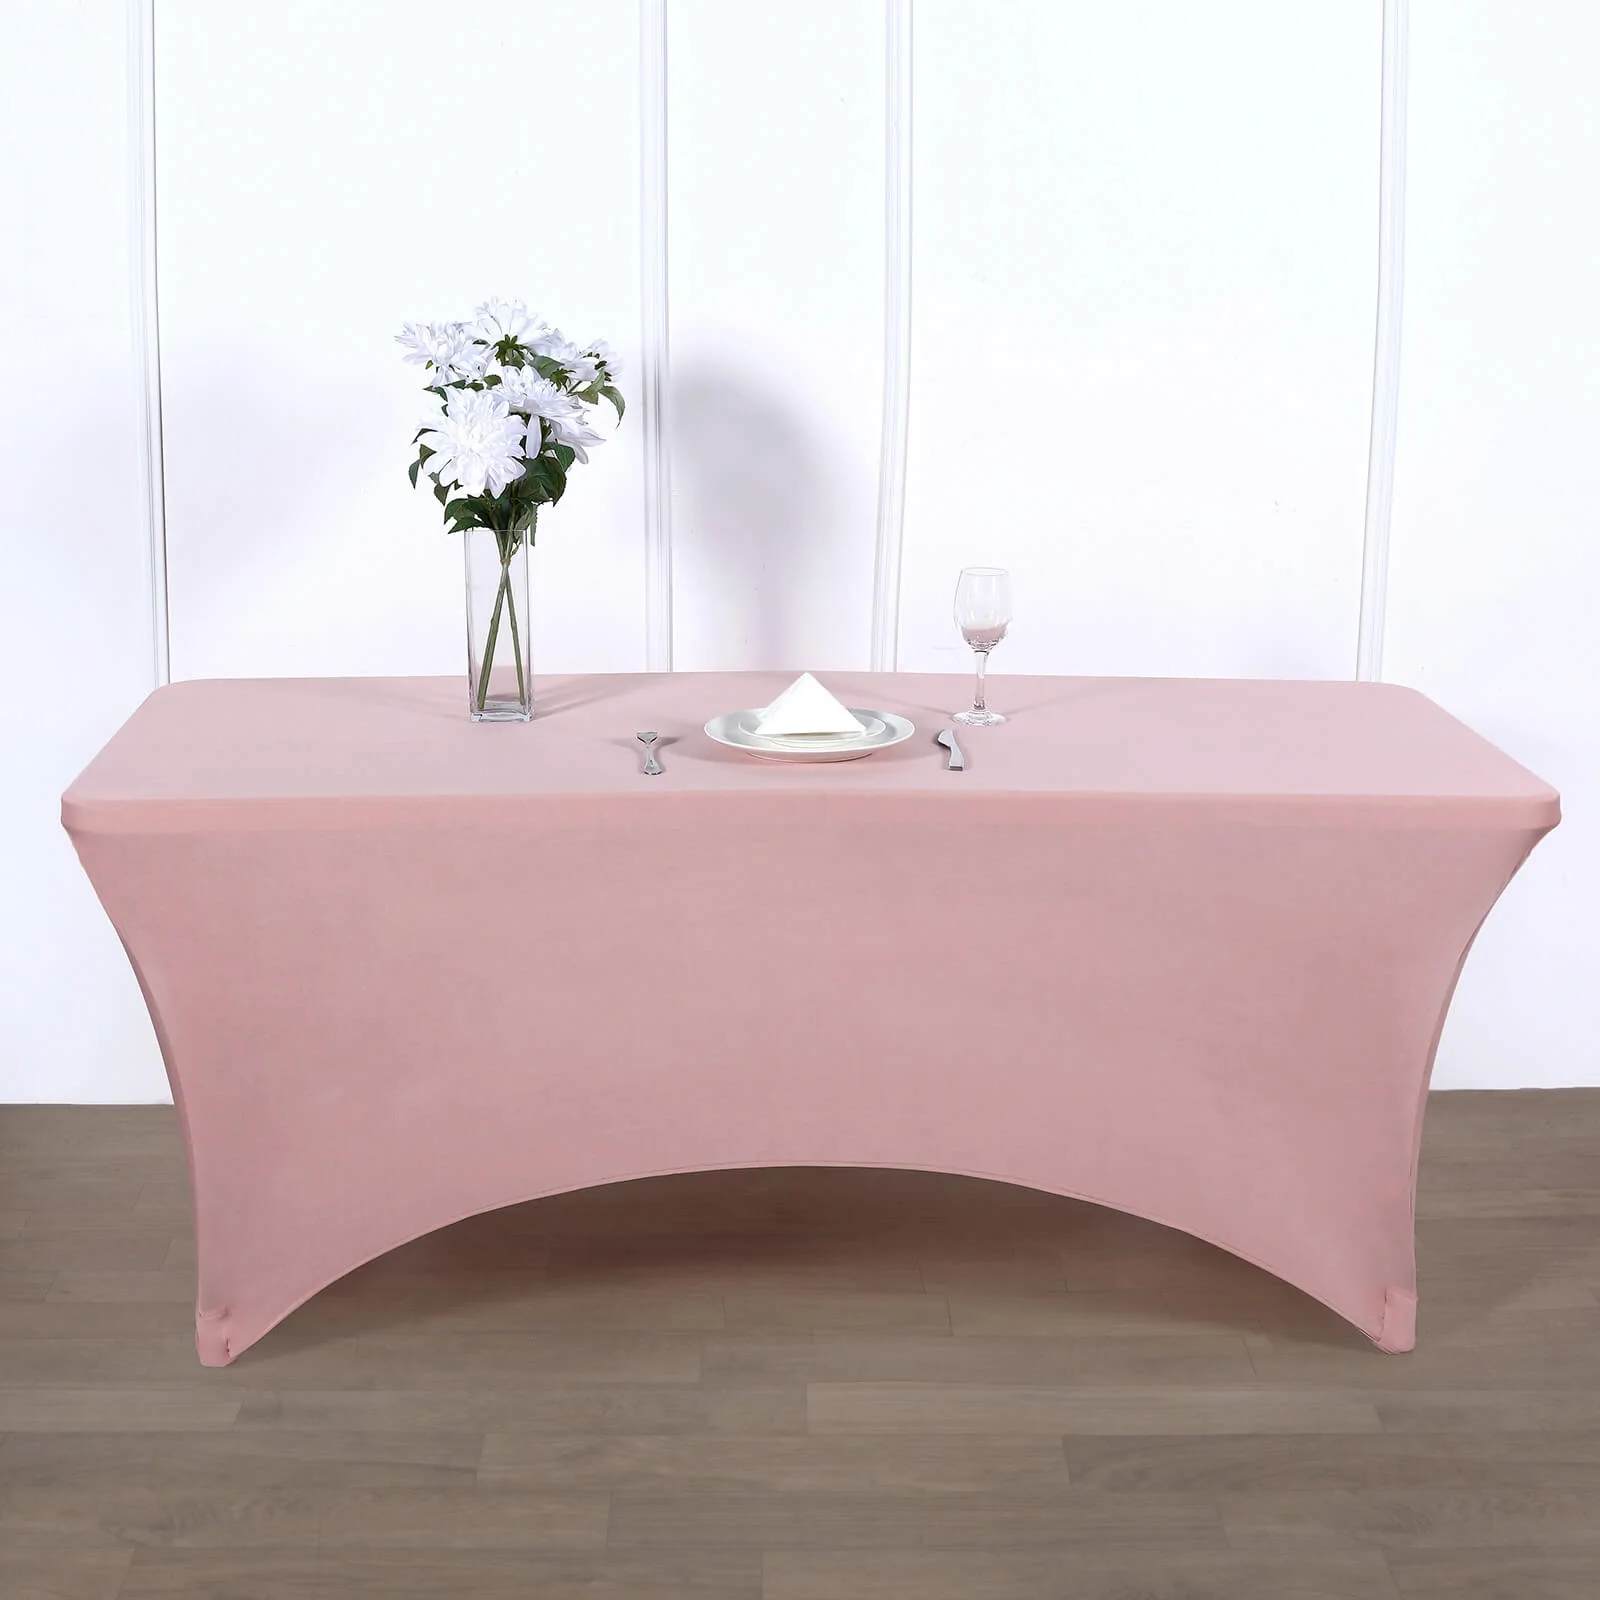 Dusty Rose - 6 Ft Rectangular Spandex Table Cover Wedding Party - $33.88